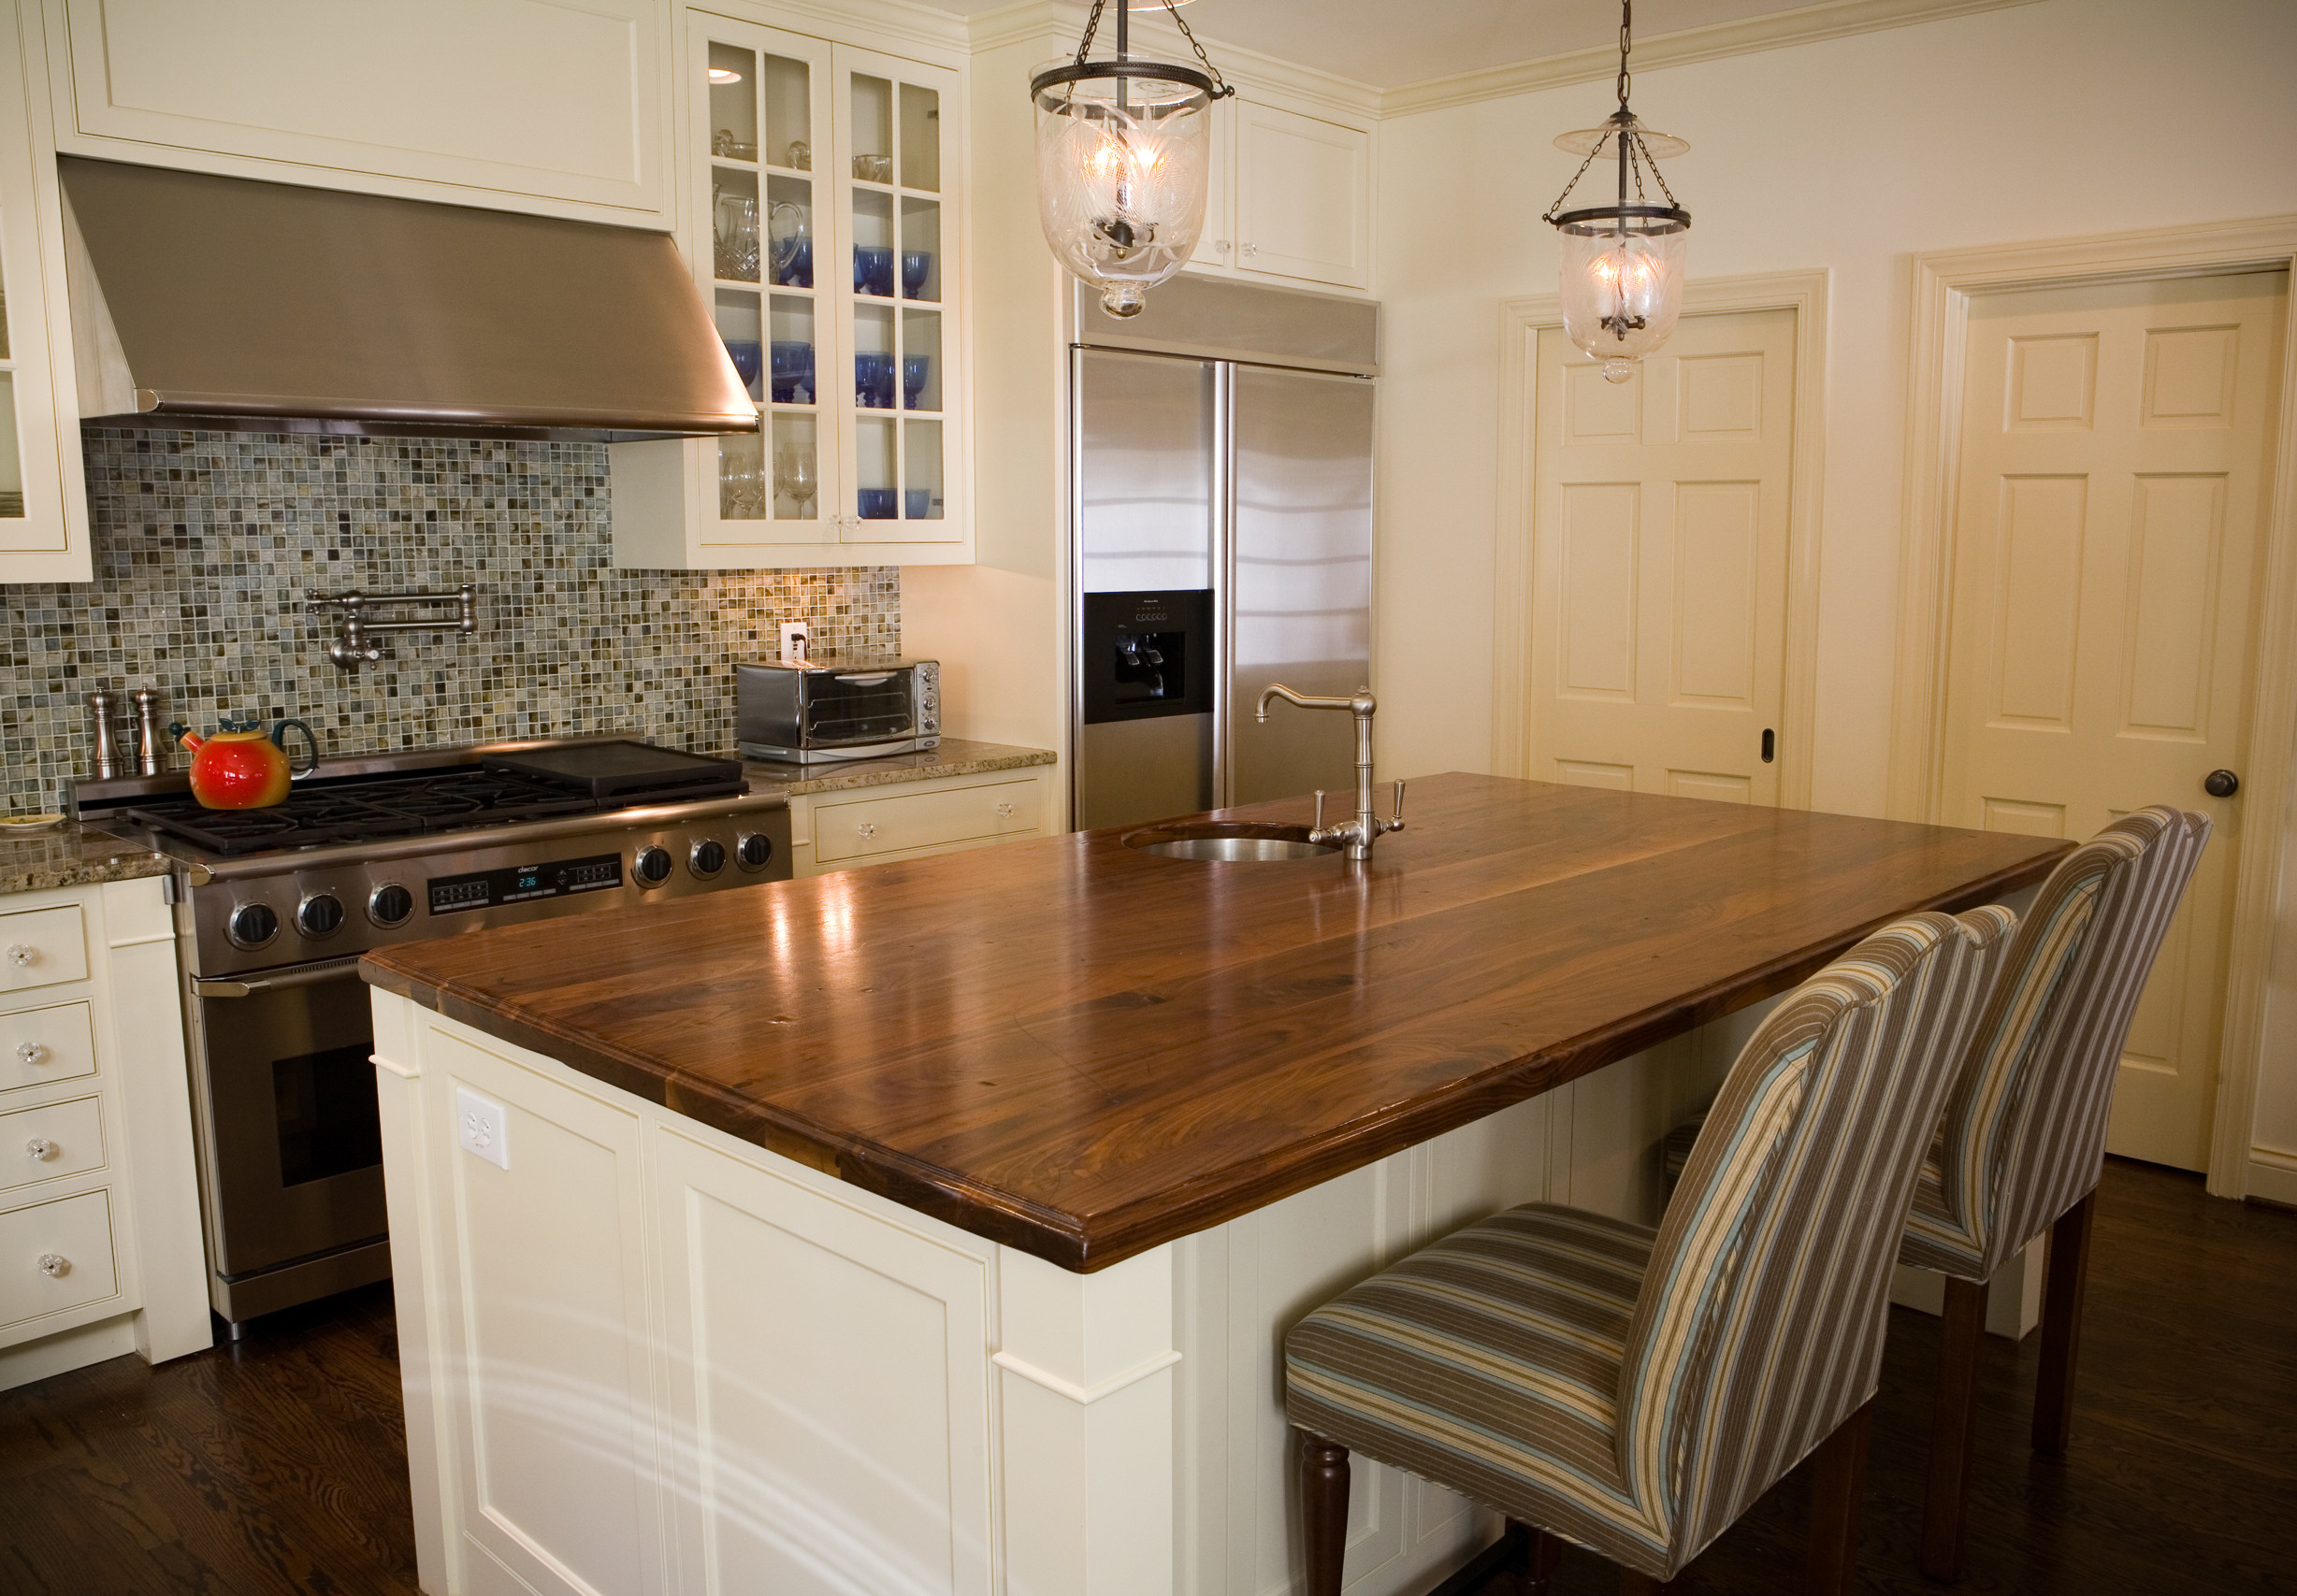 Kitchen Countertops And Cabinets
 All About Wood Kitchen Countertops You Have to Know